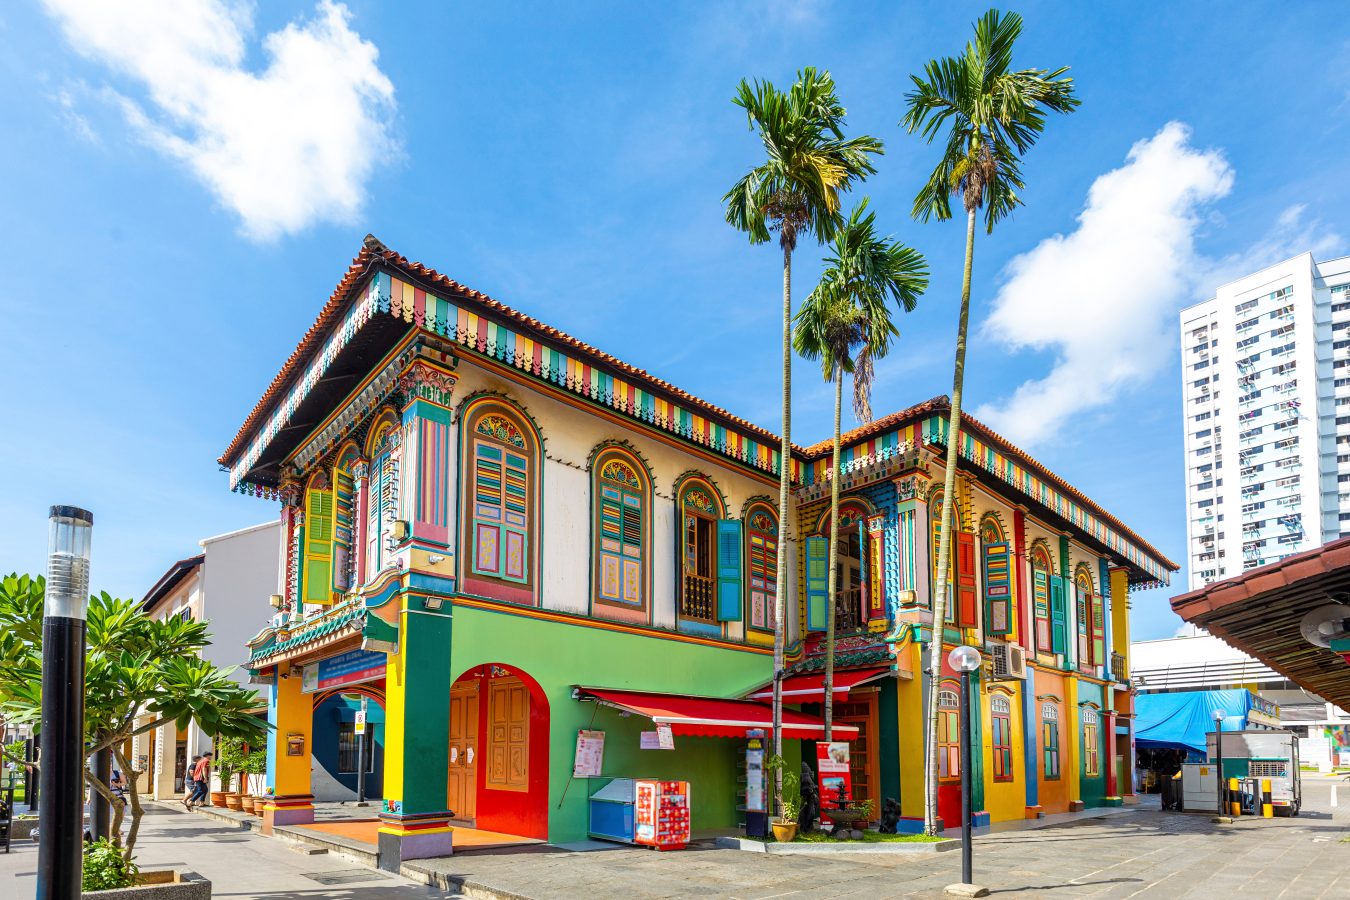 The colorful buildings of Little India in Singapore - a great spot to visit on a layover.